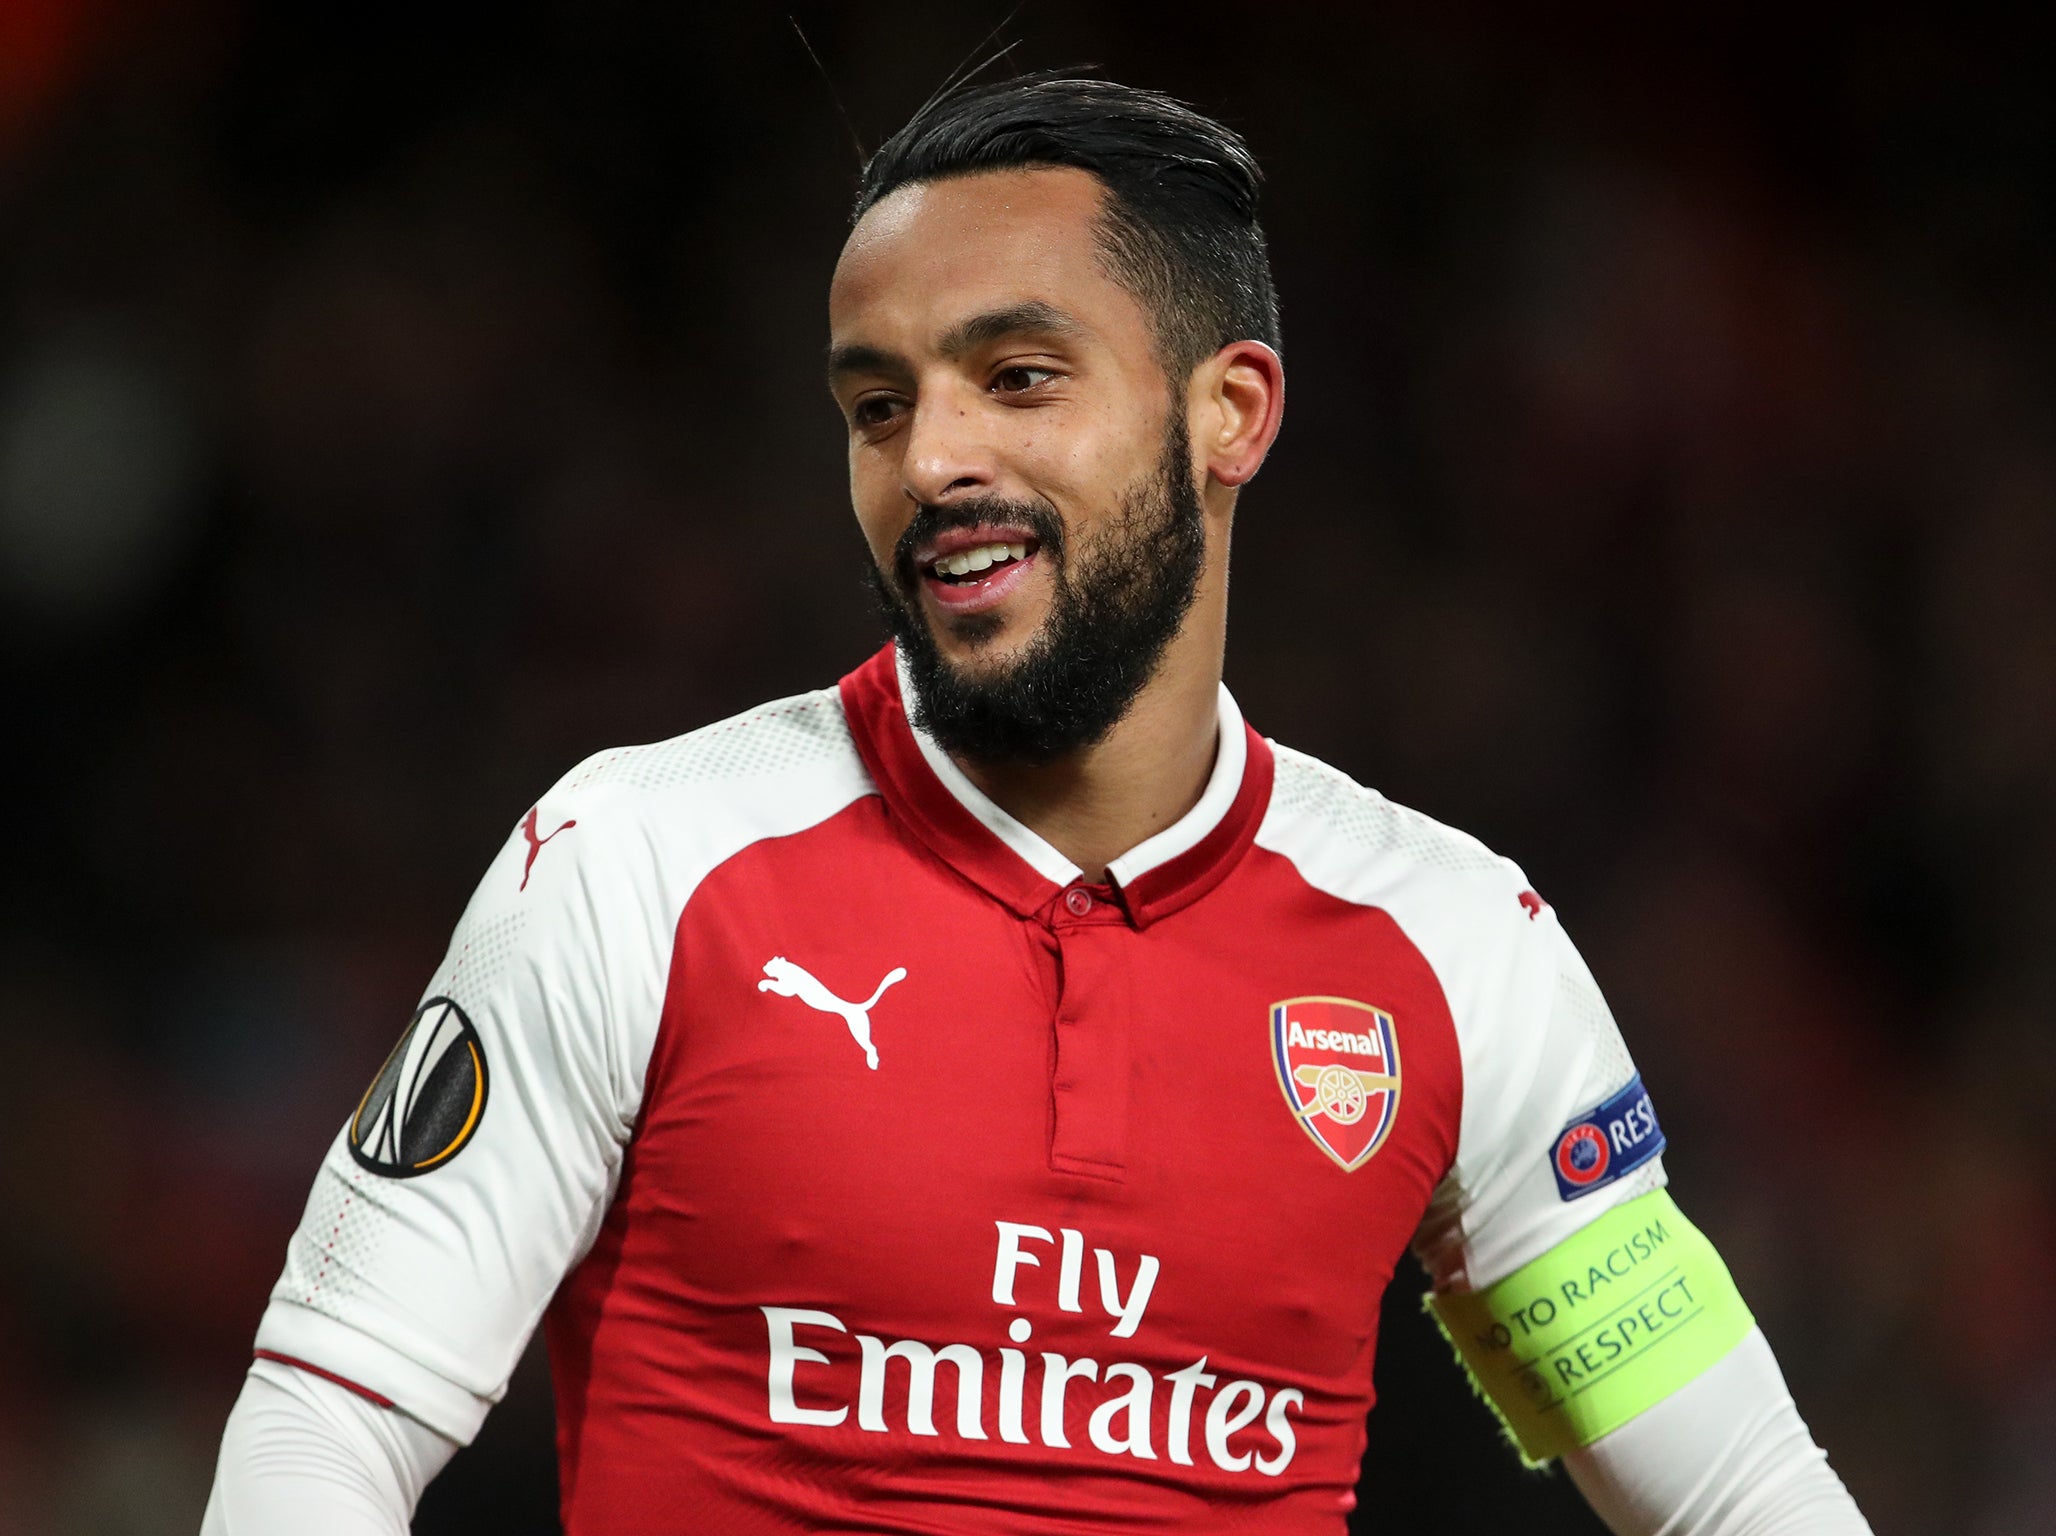 Theo Walcott has struggled to nail down a first-team place this season